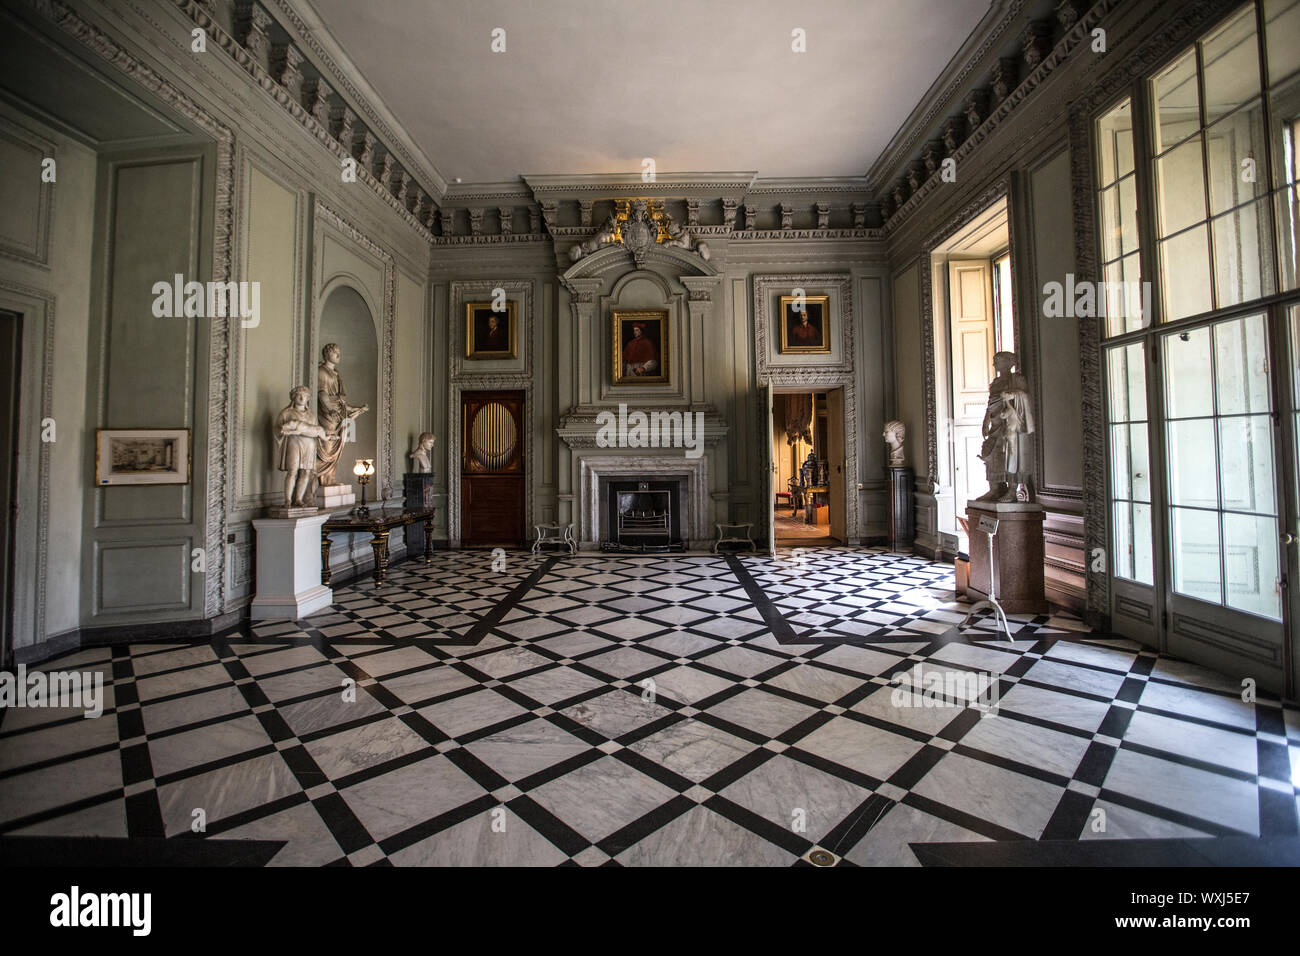 Petworth House, West Sussex, England, 17th-century Grade I listed country house, rebuilt in 1688 by Charles Seymour, 6th Duke of Somerset, England UK Stock Photo